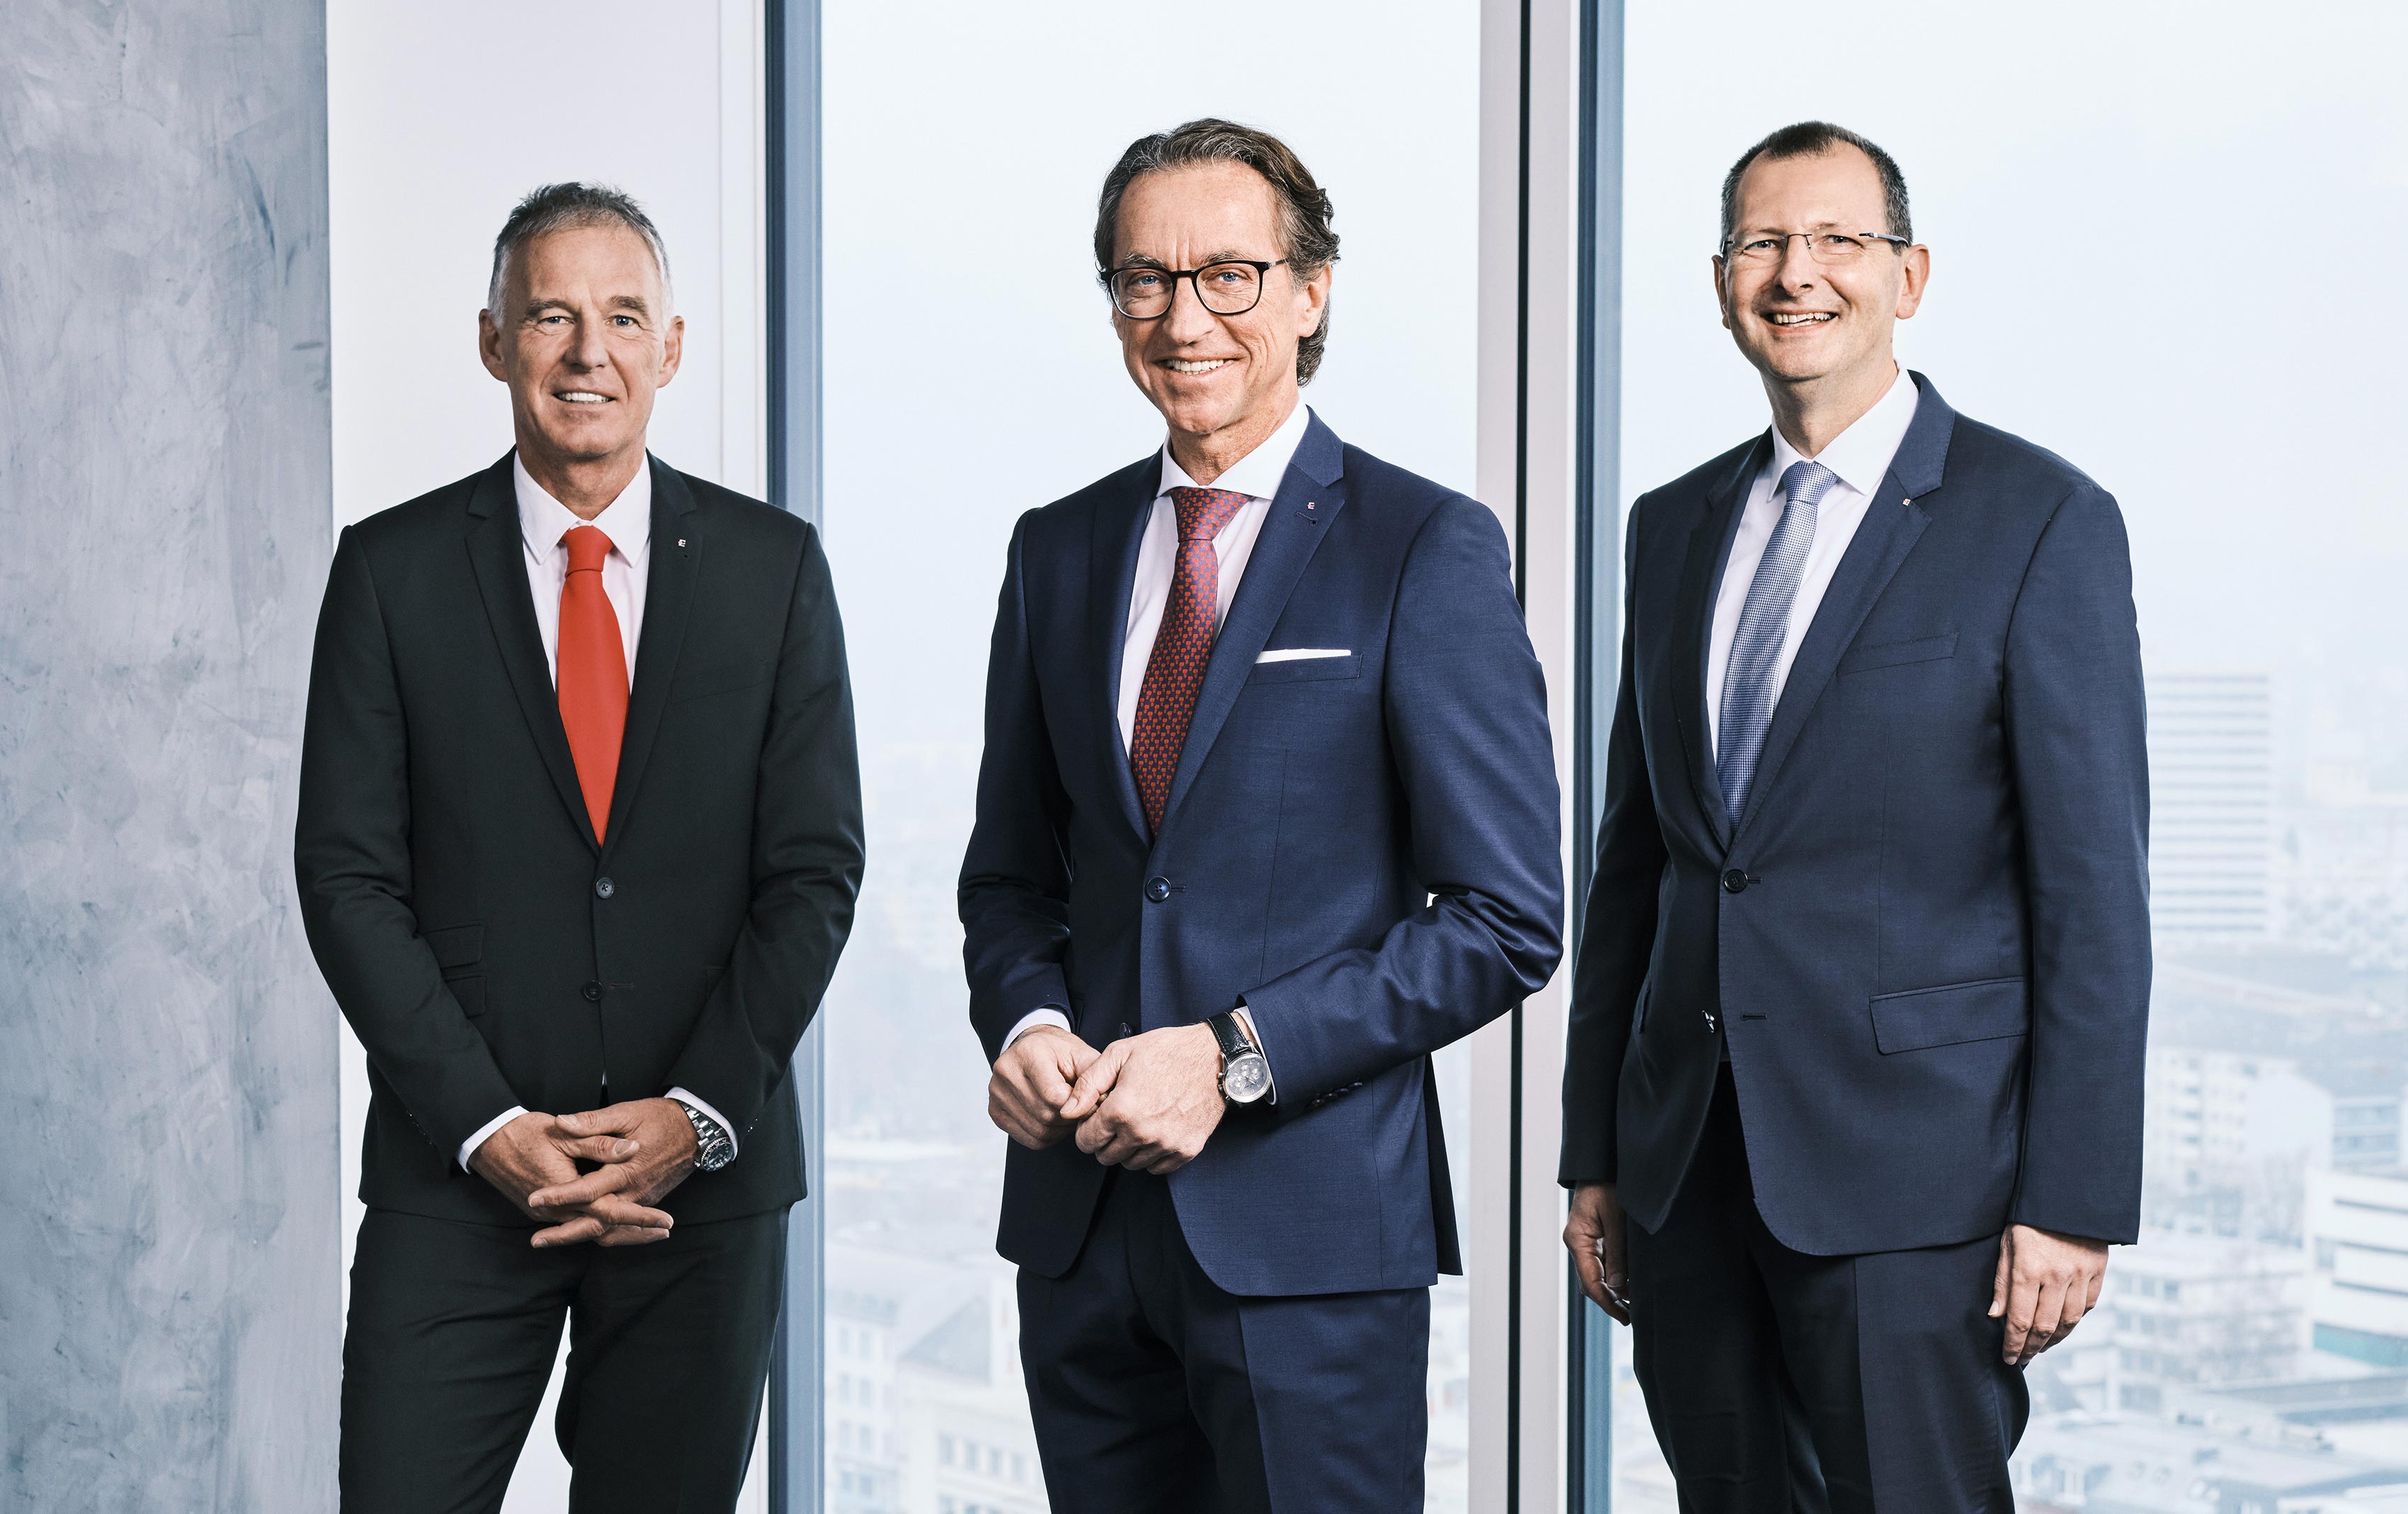 Dr. Andreas Kolar (Member of the Management Board), Chief Executive Officer Dr. Leonhard Schitter (Chairman of the Management Board), Dipl.-Ing. Stefan Stallinger MBA (Member of the Management Board) (photo)